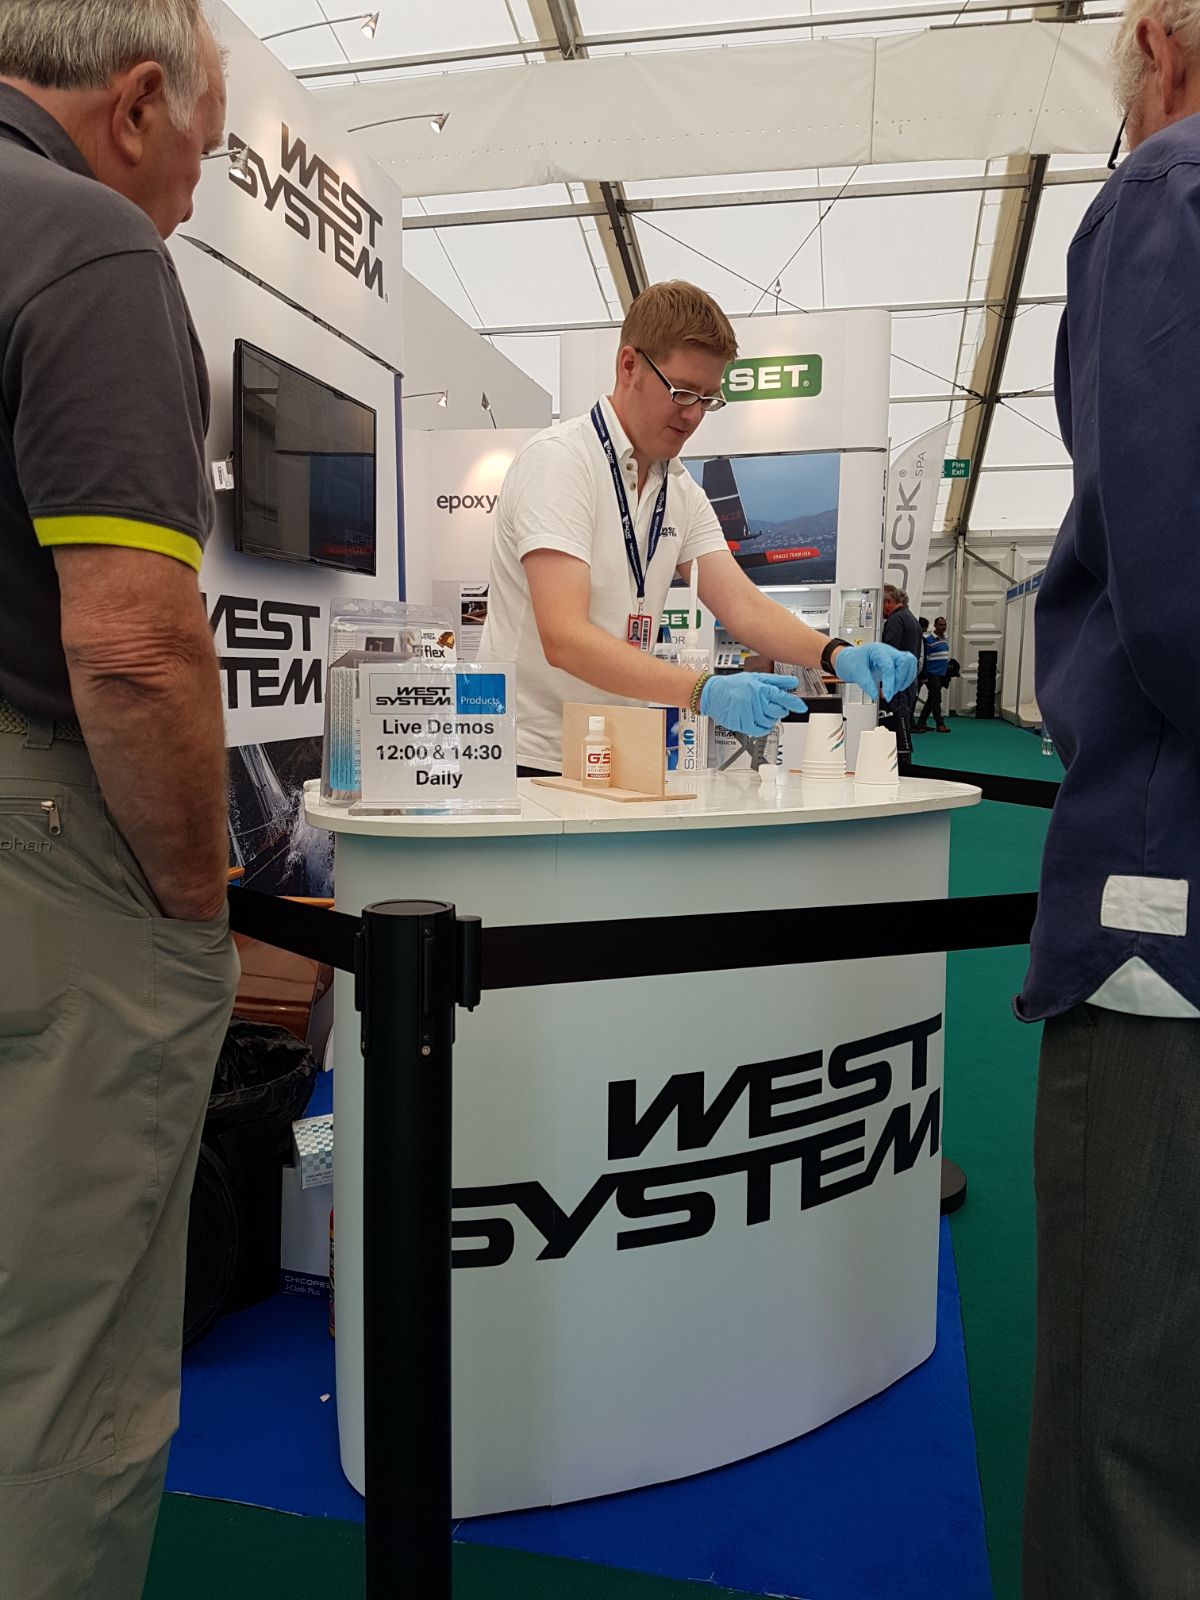 Live demos of WEST SYSTEM® Epoxy Products at LBS